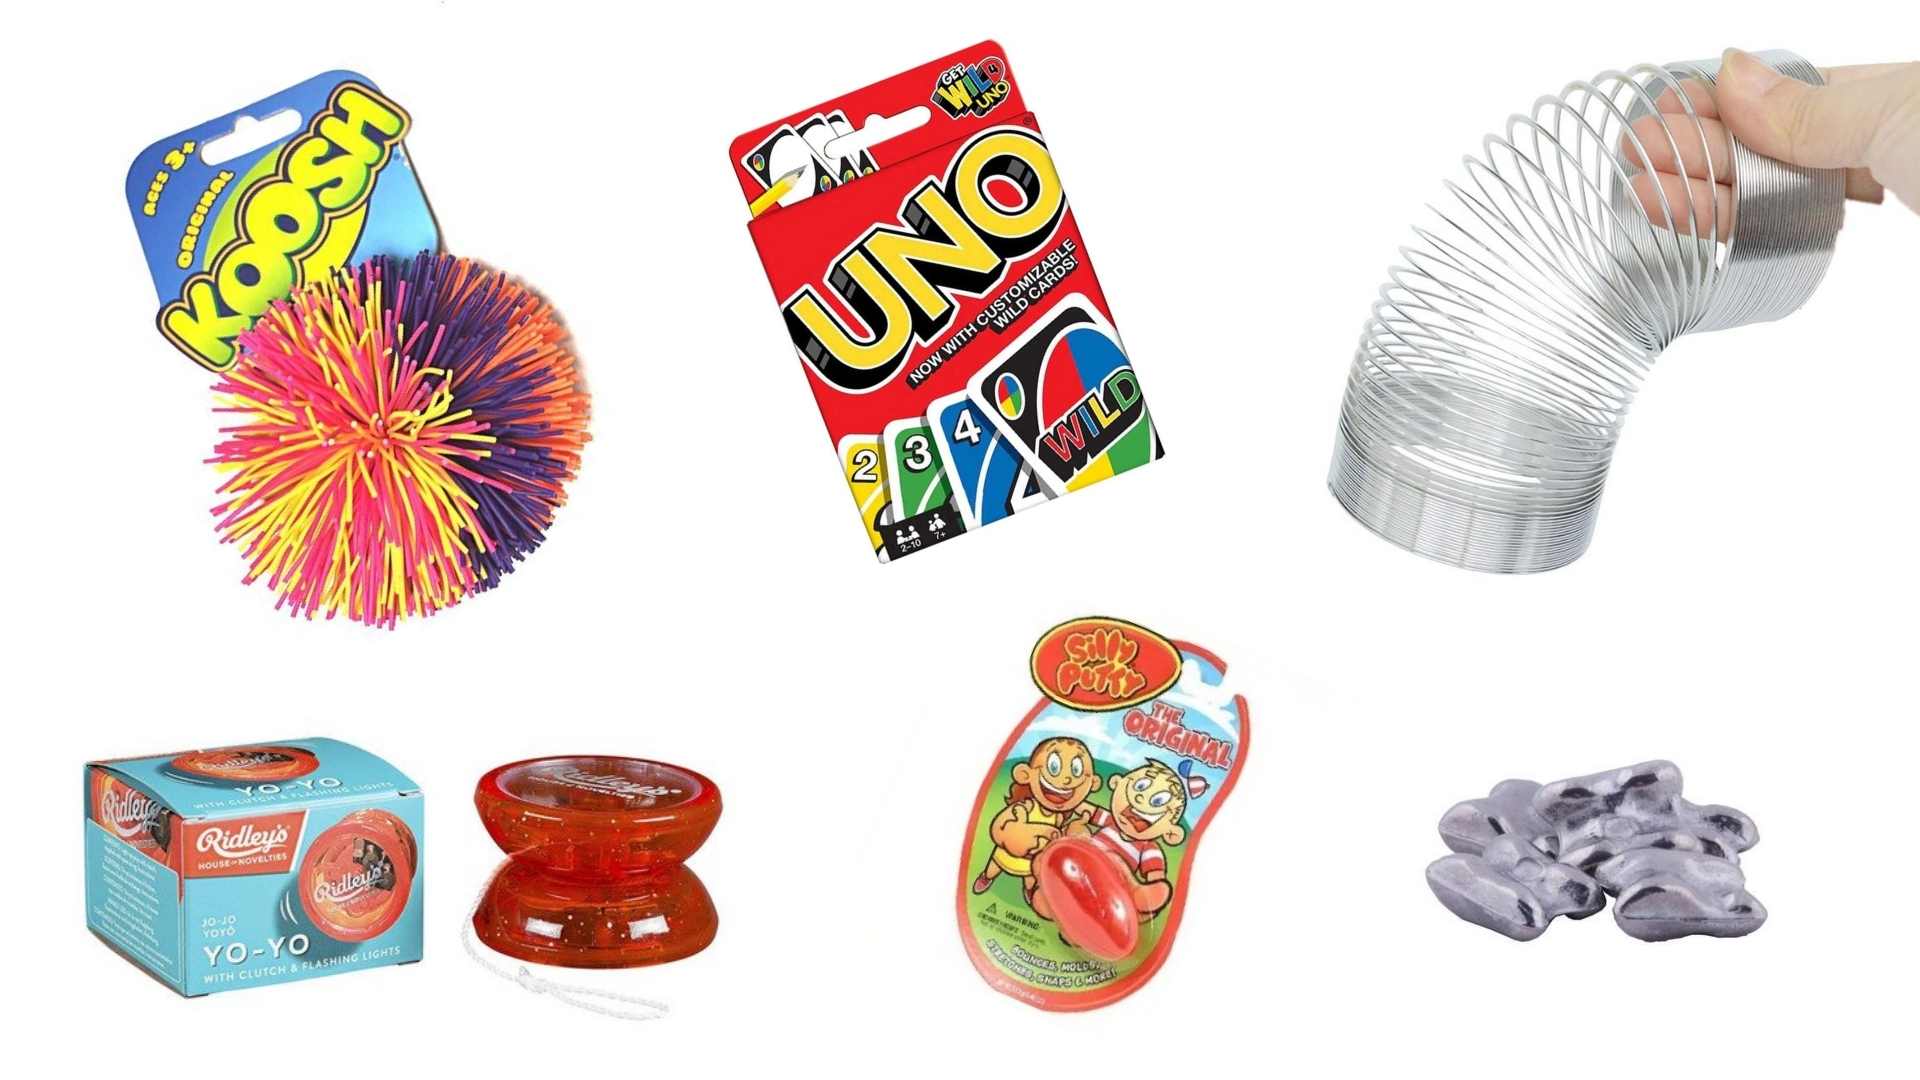 A Koosh ball, a yoyo, silly putty, a pack of Uno, a slinky and some knucklebones.